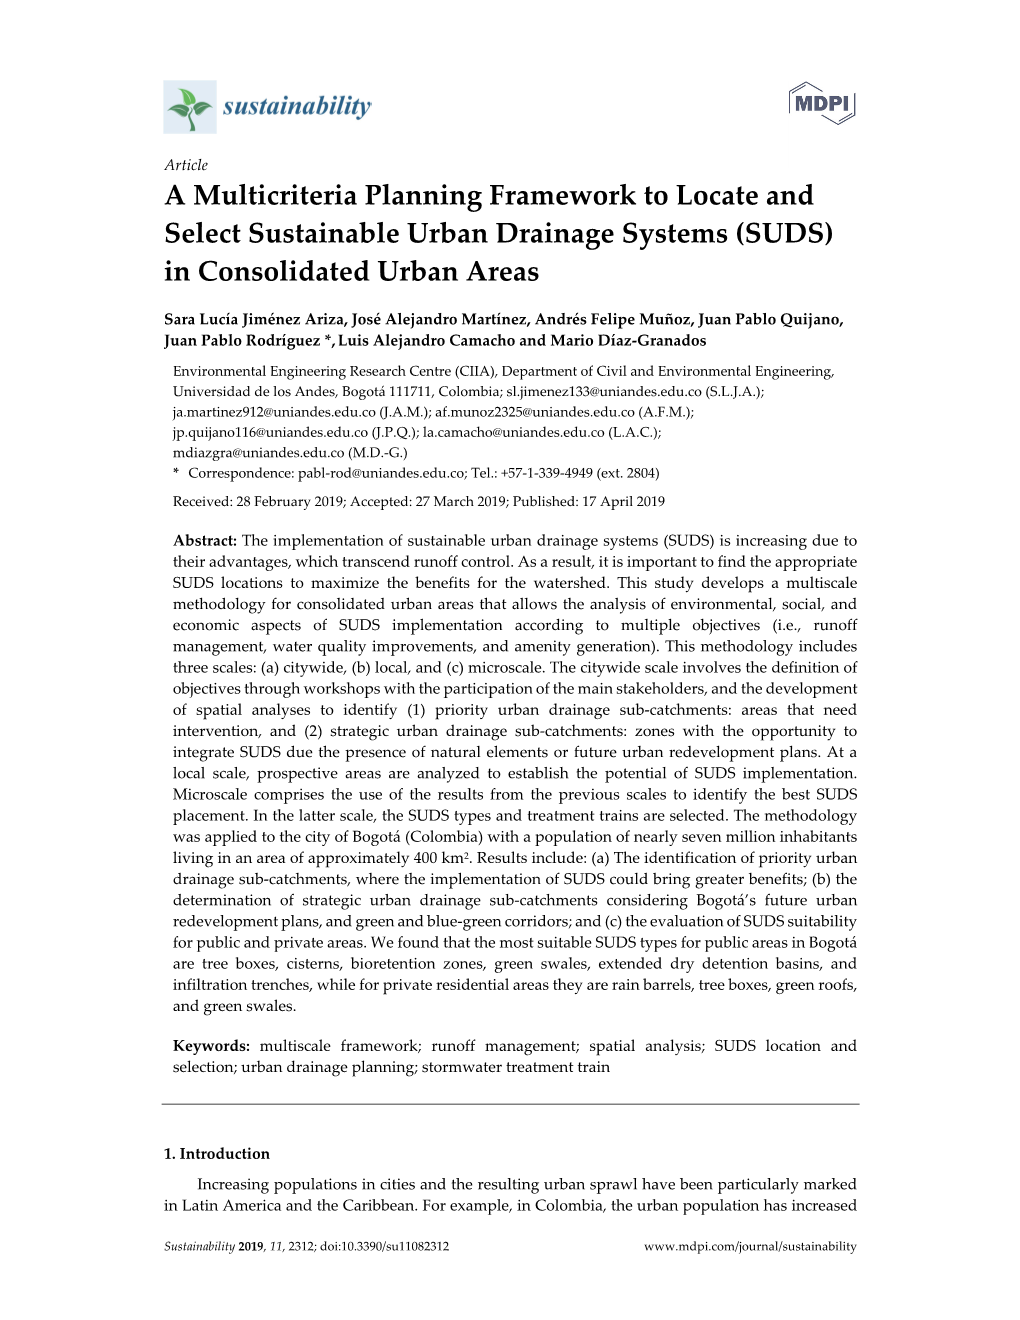 A Multicriteria Planning Framework to Locate and Select Sustainable Urban Drainage Systems (SUDS) in Consolidated Urban Areas